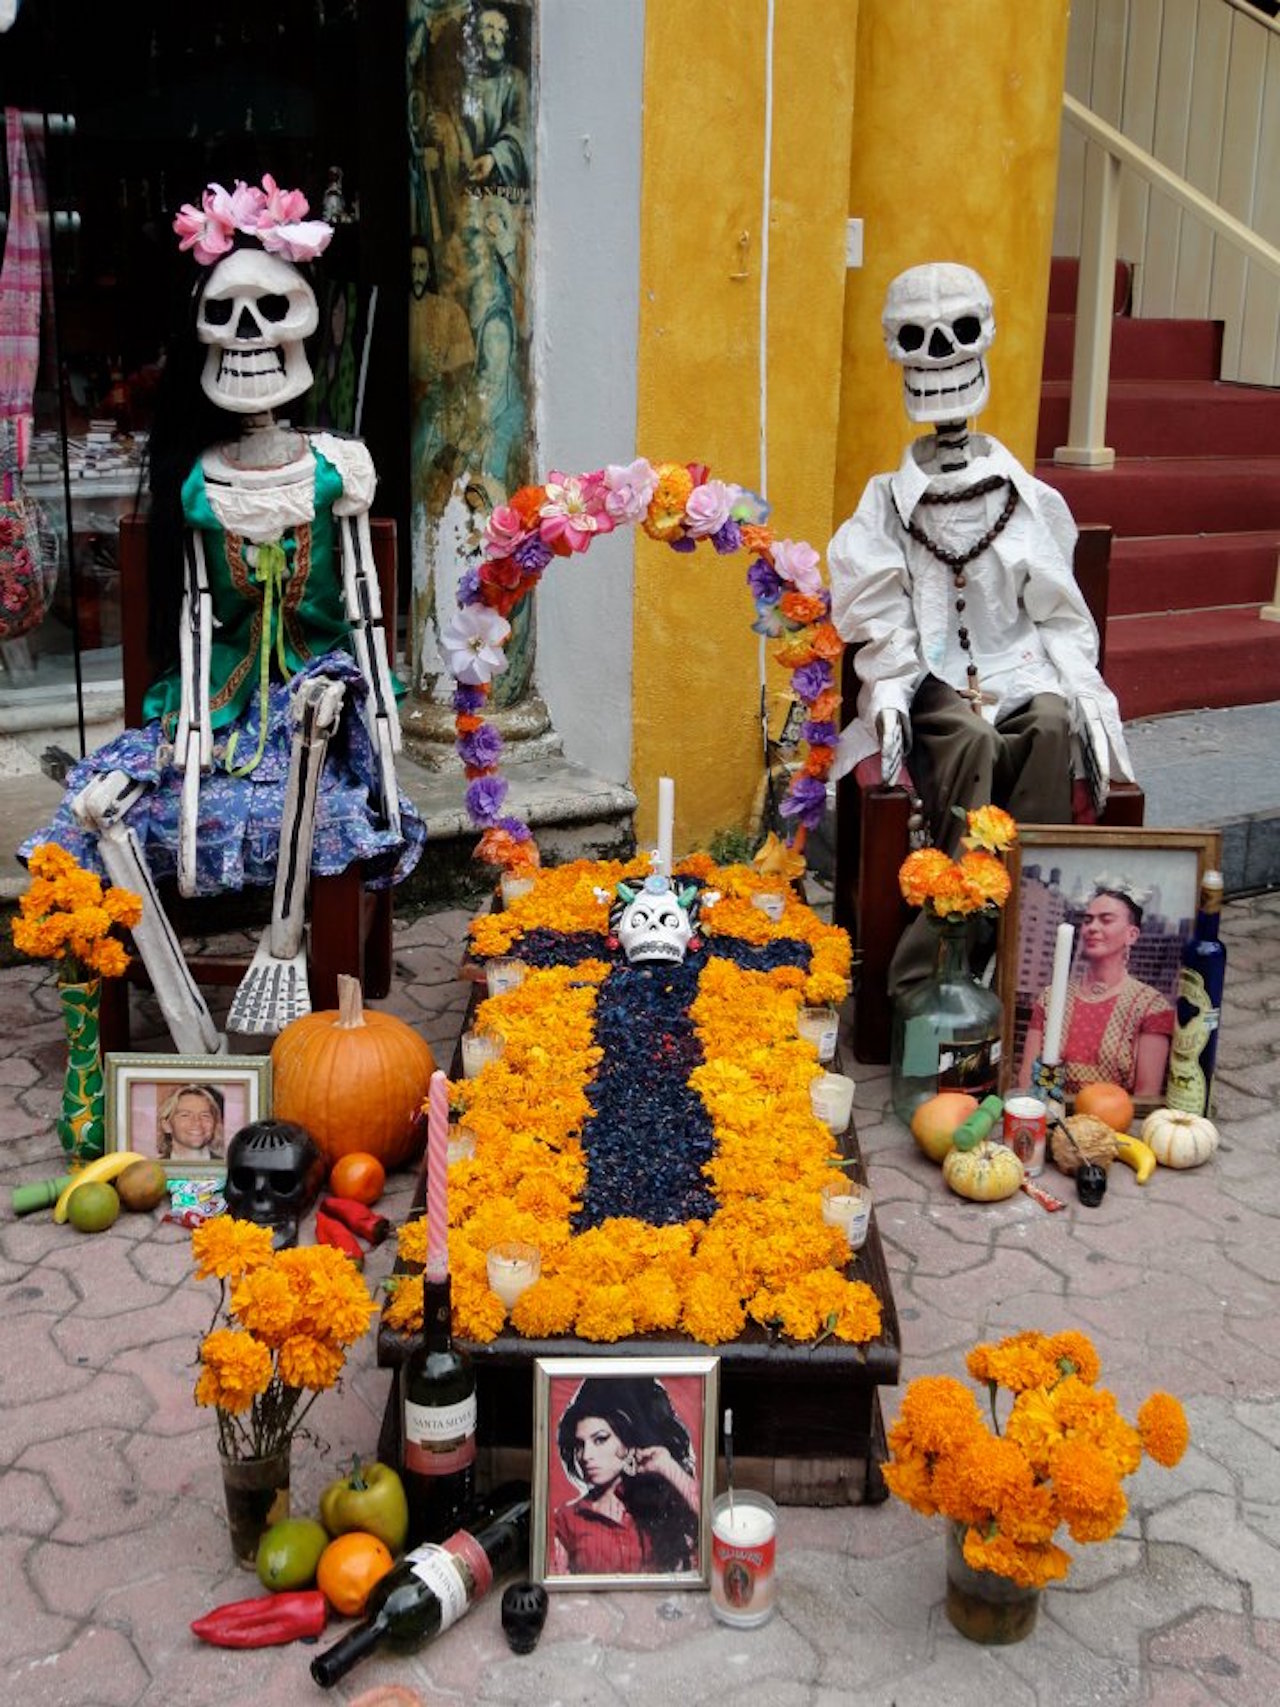 day of the dead memorial